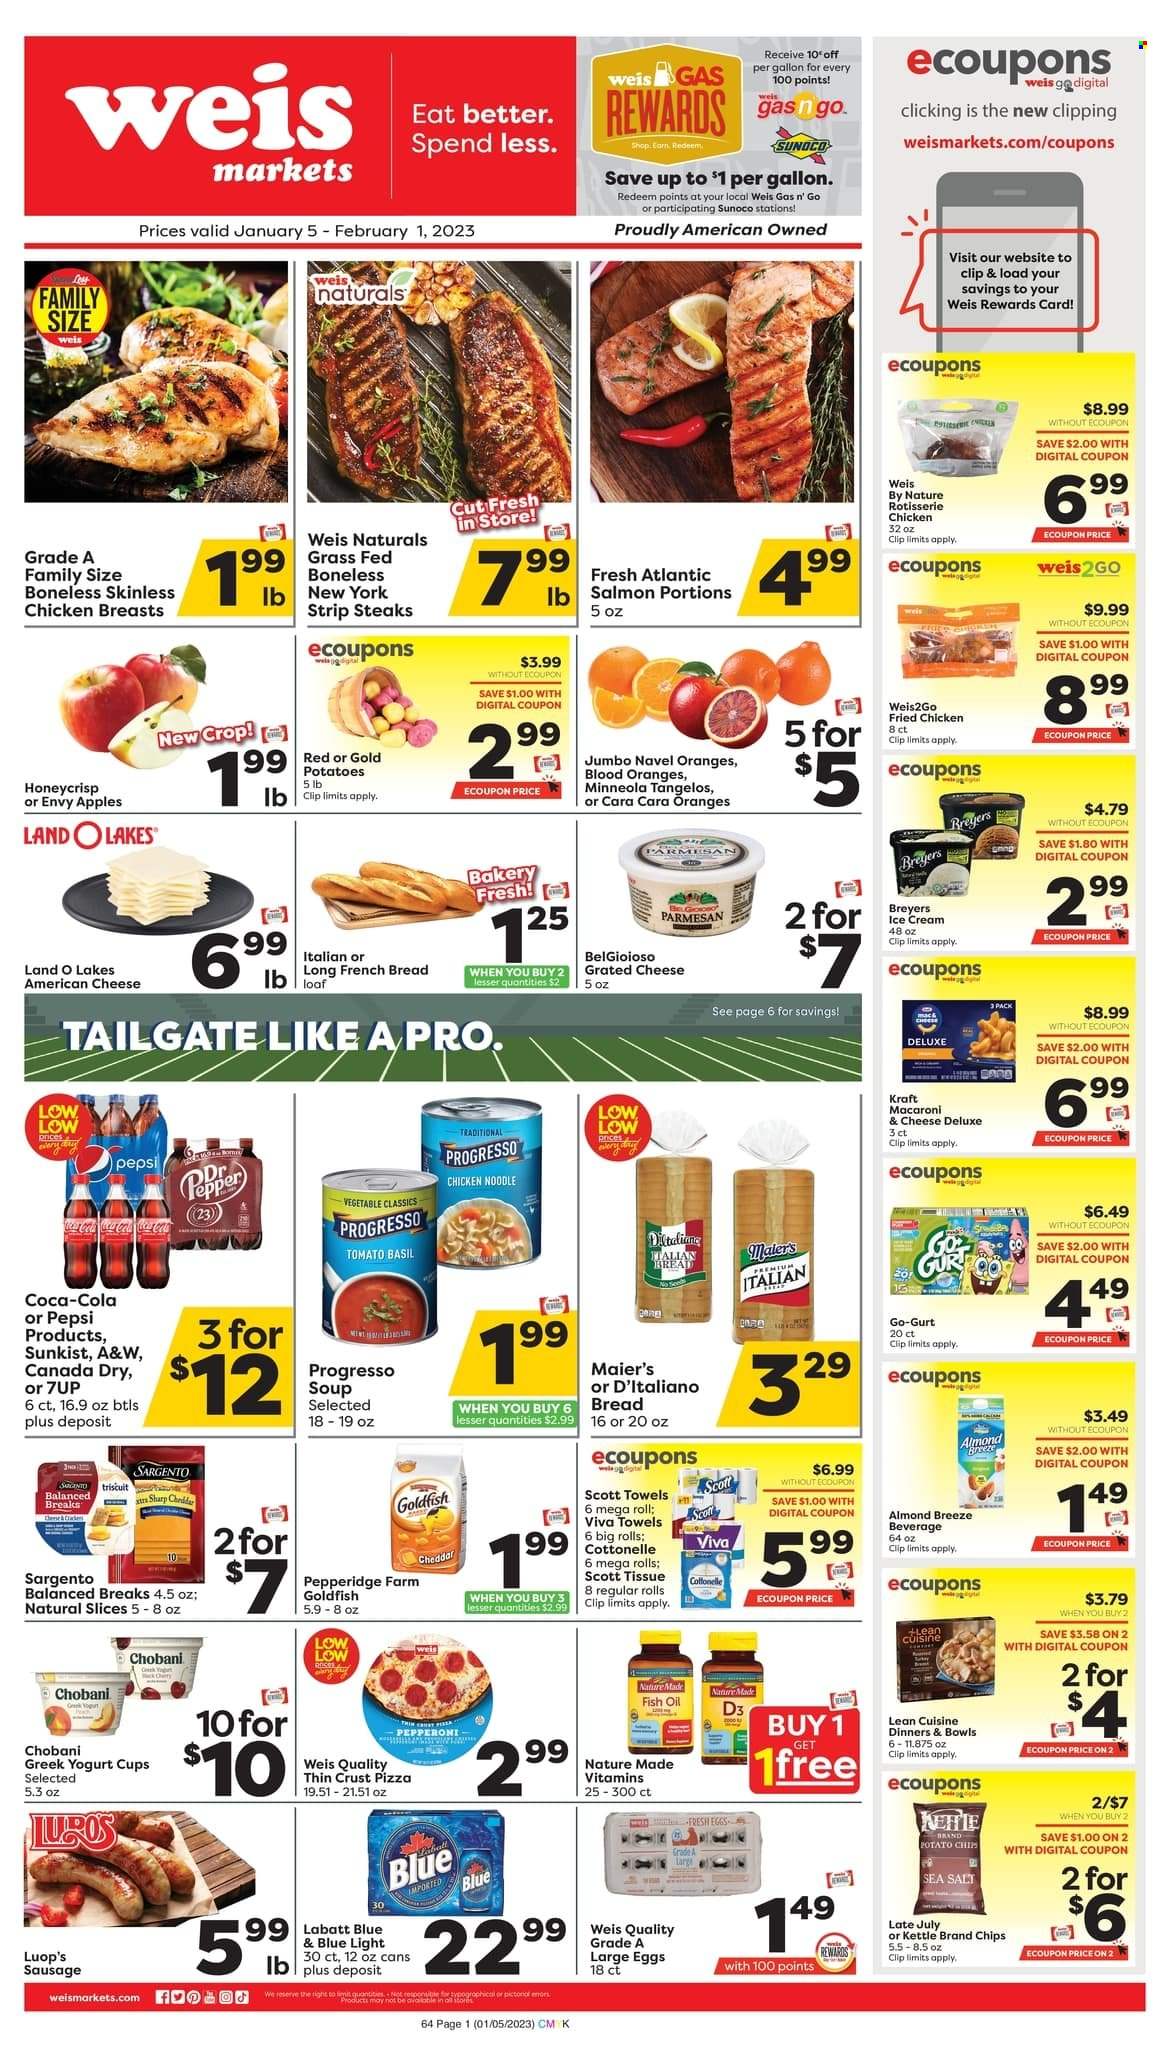 thumbnail - Weis Flyer - 01/05/2023 - 02/01/2023 - Sales products - bread, french bread, potatoes, apples, tangelos, oranges, chicken breasts, beef meat, steak, striploin steak, salmon, pizza, chicken roast, fried chicken, noodles, Progresso, Lean Cuisine, Kraft®, sausage, pepperoni, american cheese, parmesan, grated cheese, Sargento, greek yoghurt, yoghurt, Chobani, Almond Breeze, large eggs, ice cream, crackers, chips, Goldfish, oil, Canada Dry, Coca-Cola, Pepsi, 7UP, A&W, Cottonelle, Scott, tissues, Sharp, fish oil, Nature Made, vitamin D3, navel oranges. Page 1.